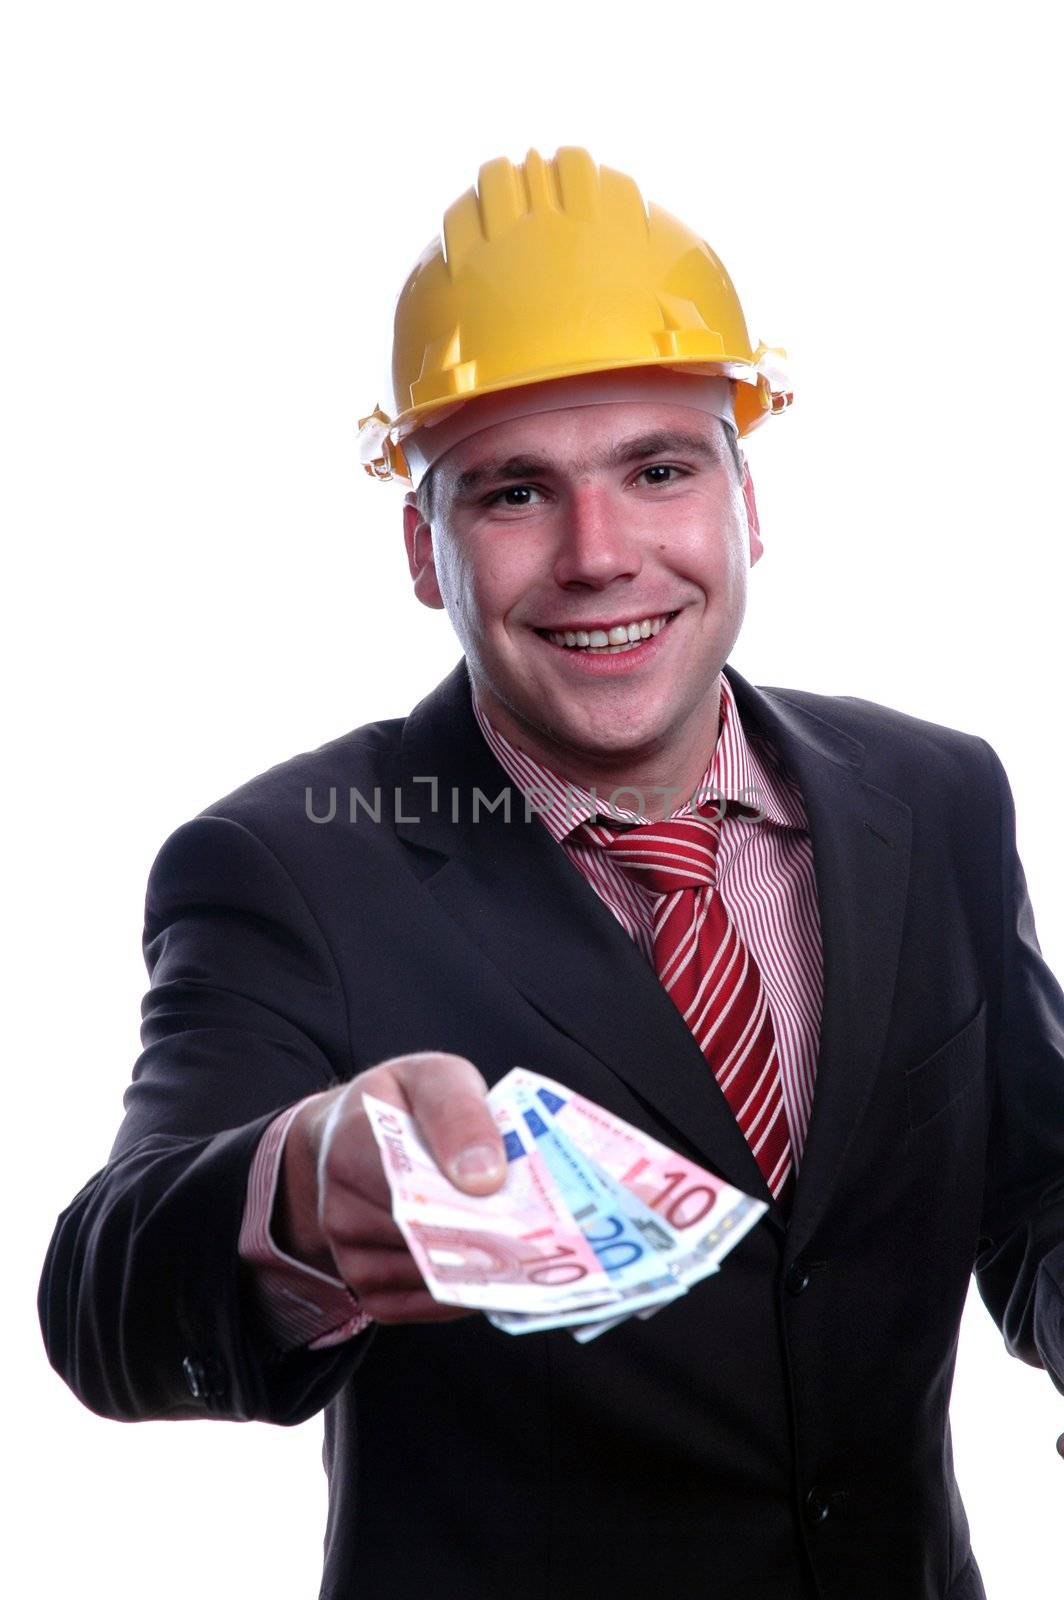 young engineer with helmet and holding banknotes